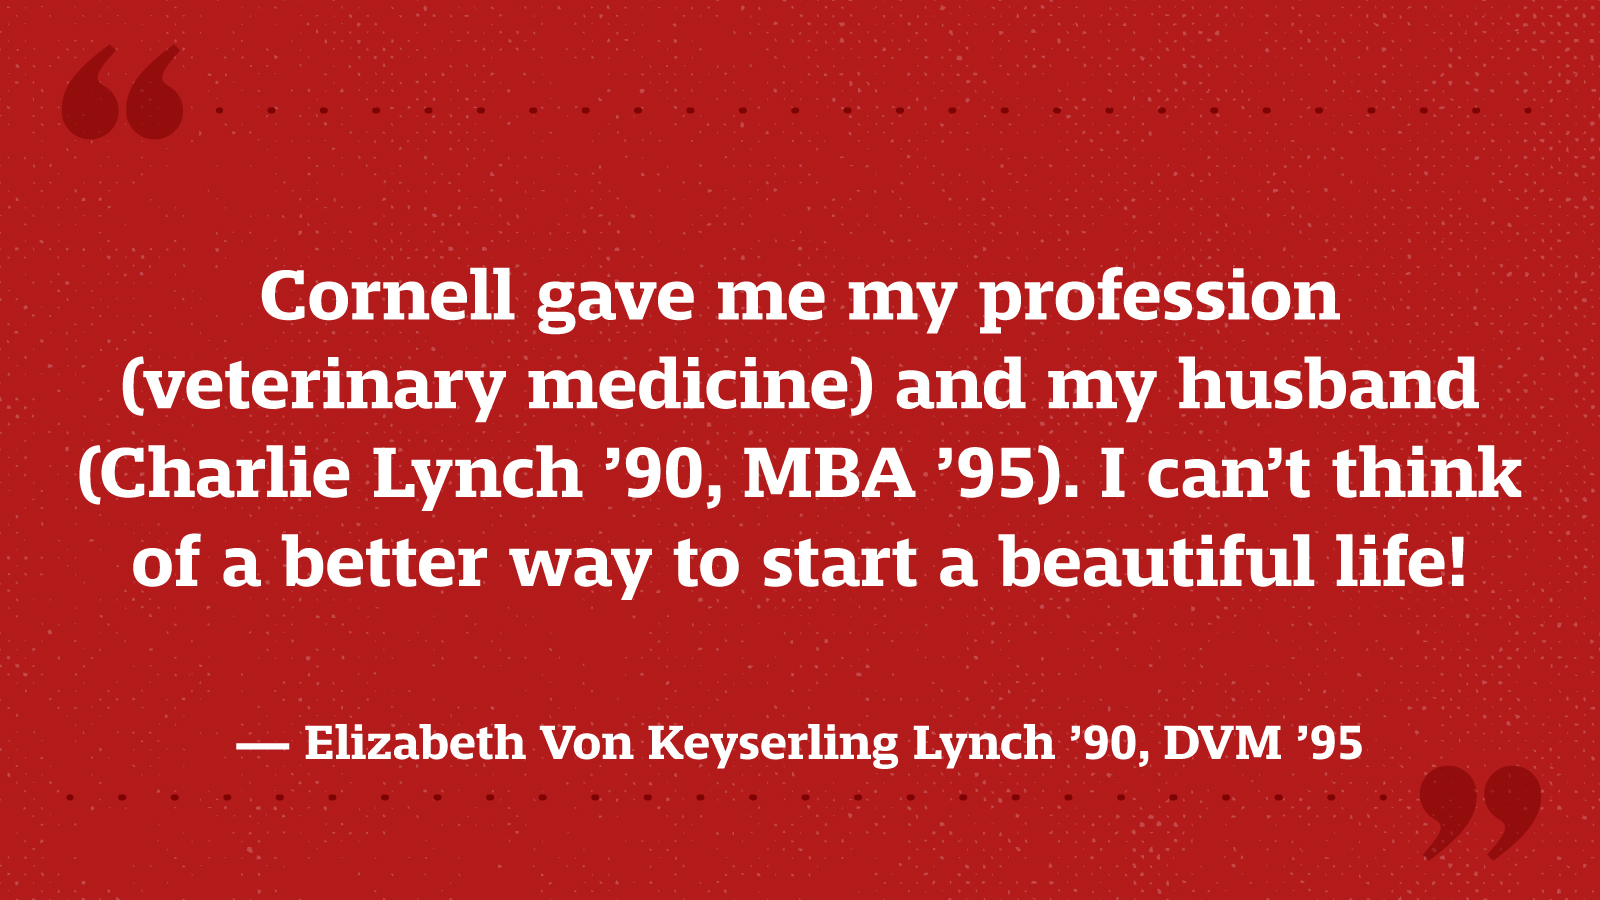 Cornell gave me my profession (veterinary medicine) and my husband (Charlie Lynch ’90, MBA ’95). I can’t think of a better way to start a beautiful life! — Elizabeth Von Keyserling Lynch ’90, DVM ’95